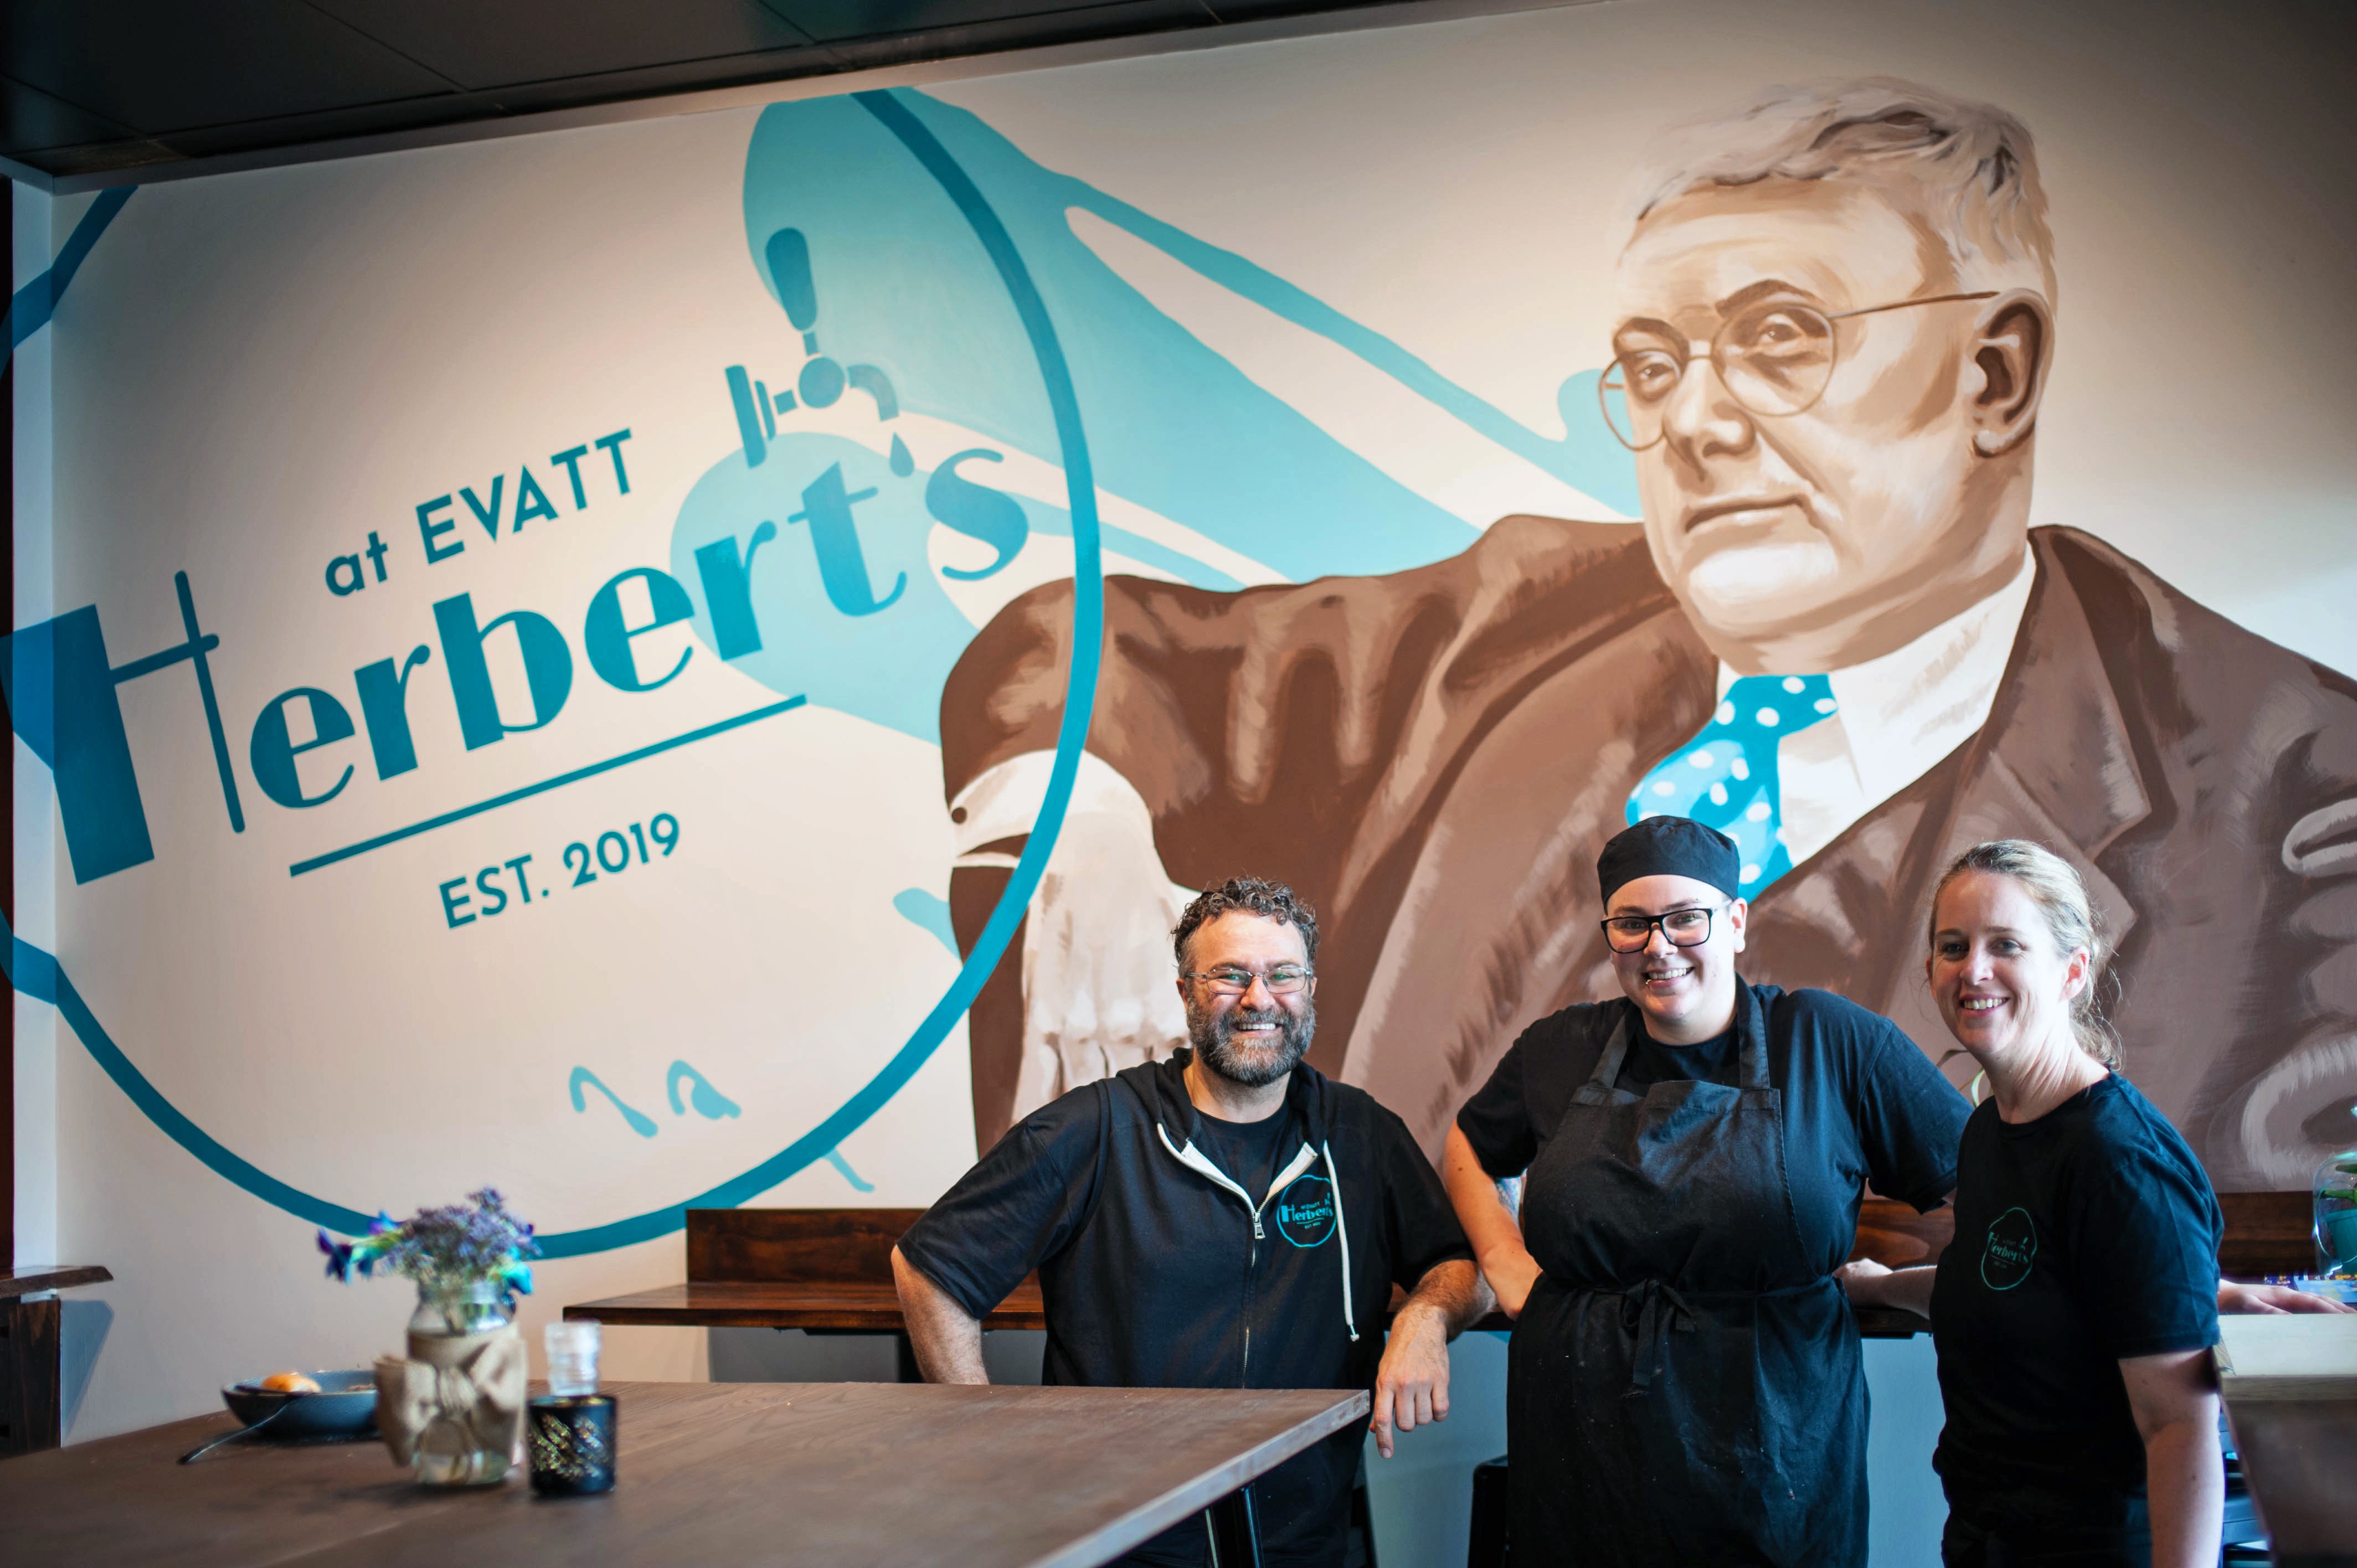 Hot in the City: Herbert's at Evatt becomes a beloved new local